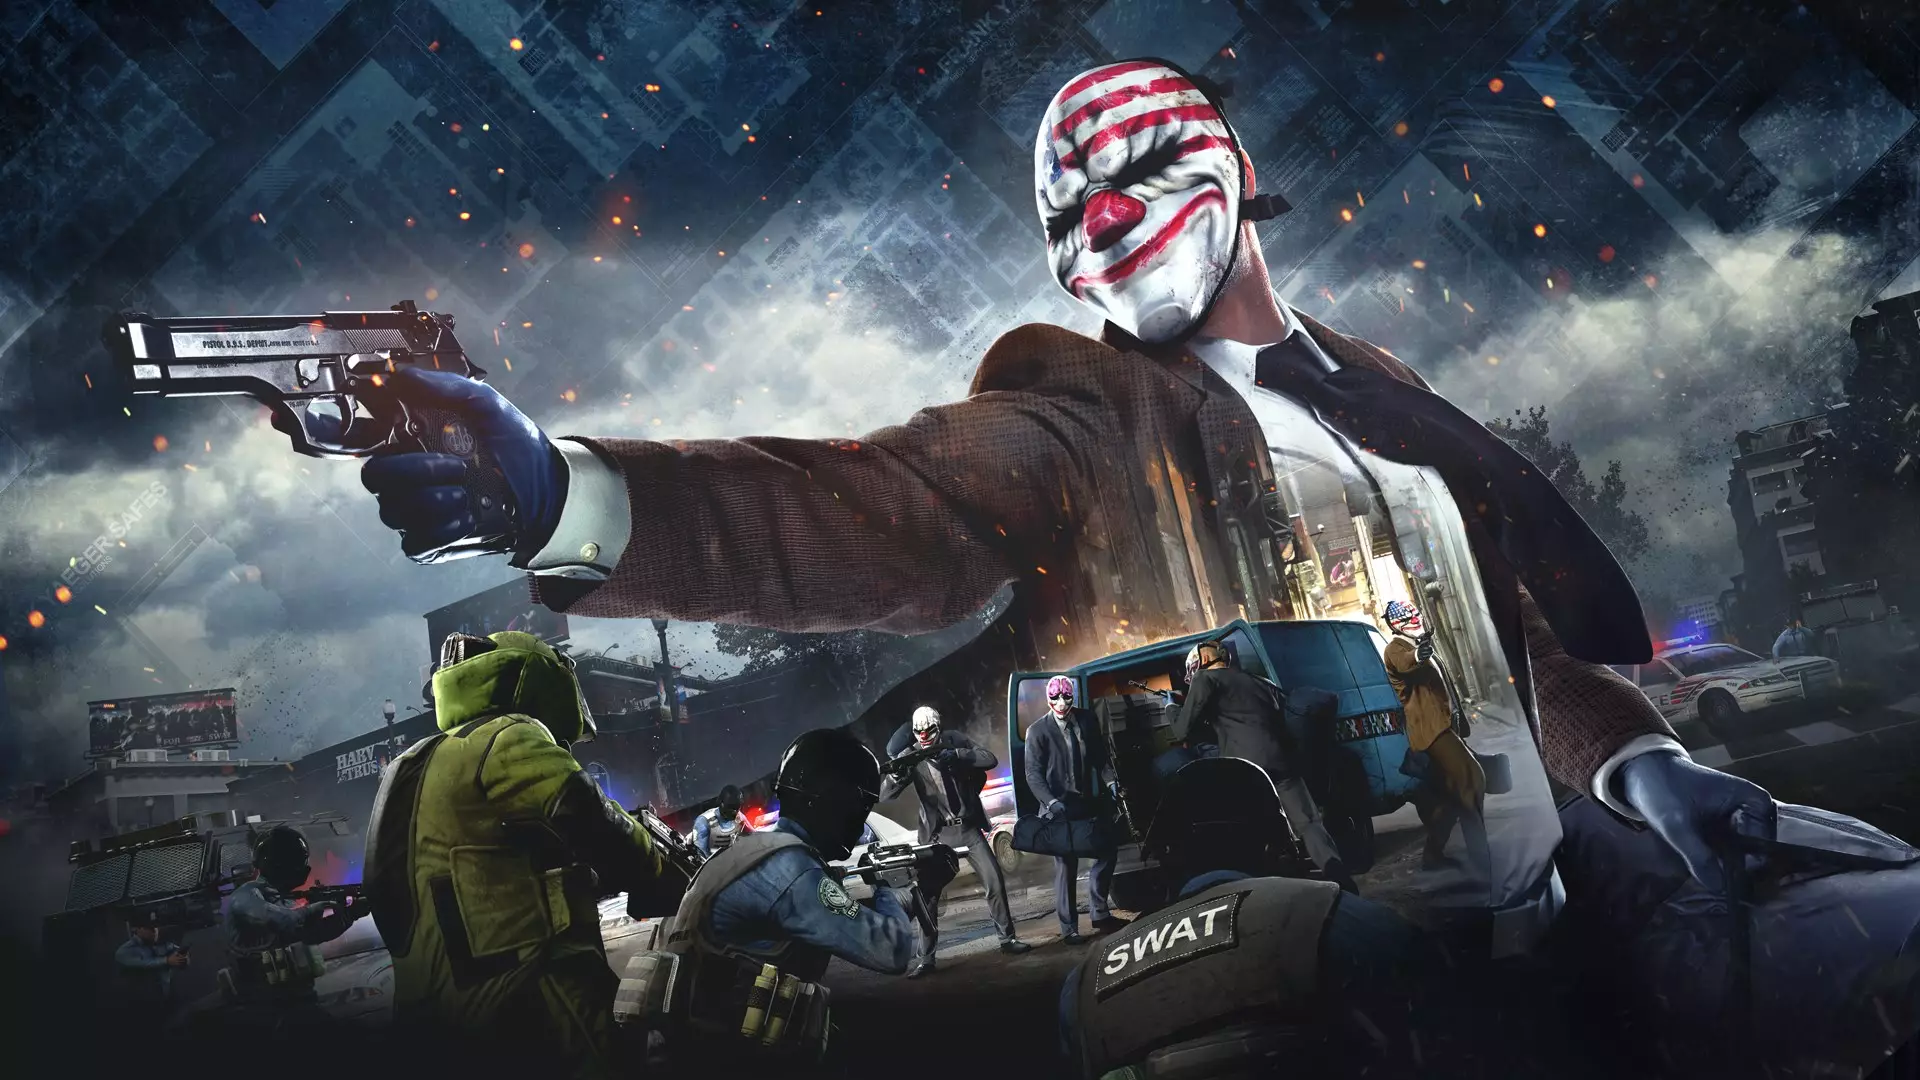 ​‘Payday 3’ Is Coming In 2022 - 2023, Financial Note Reveals